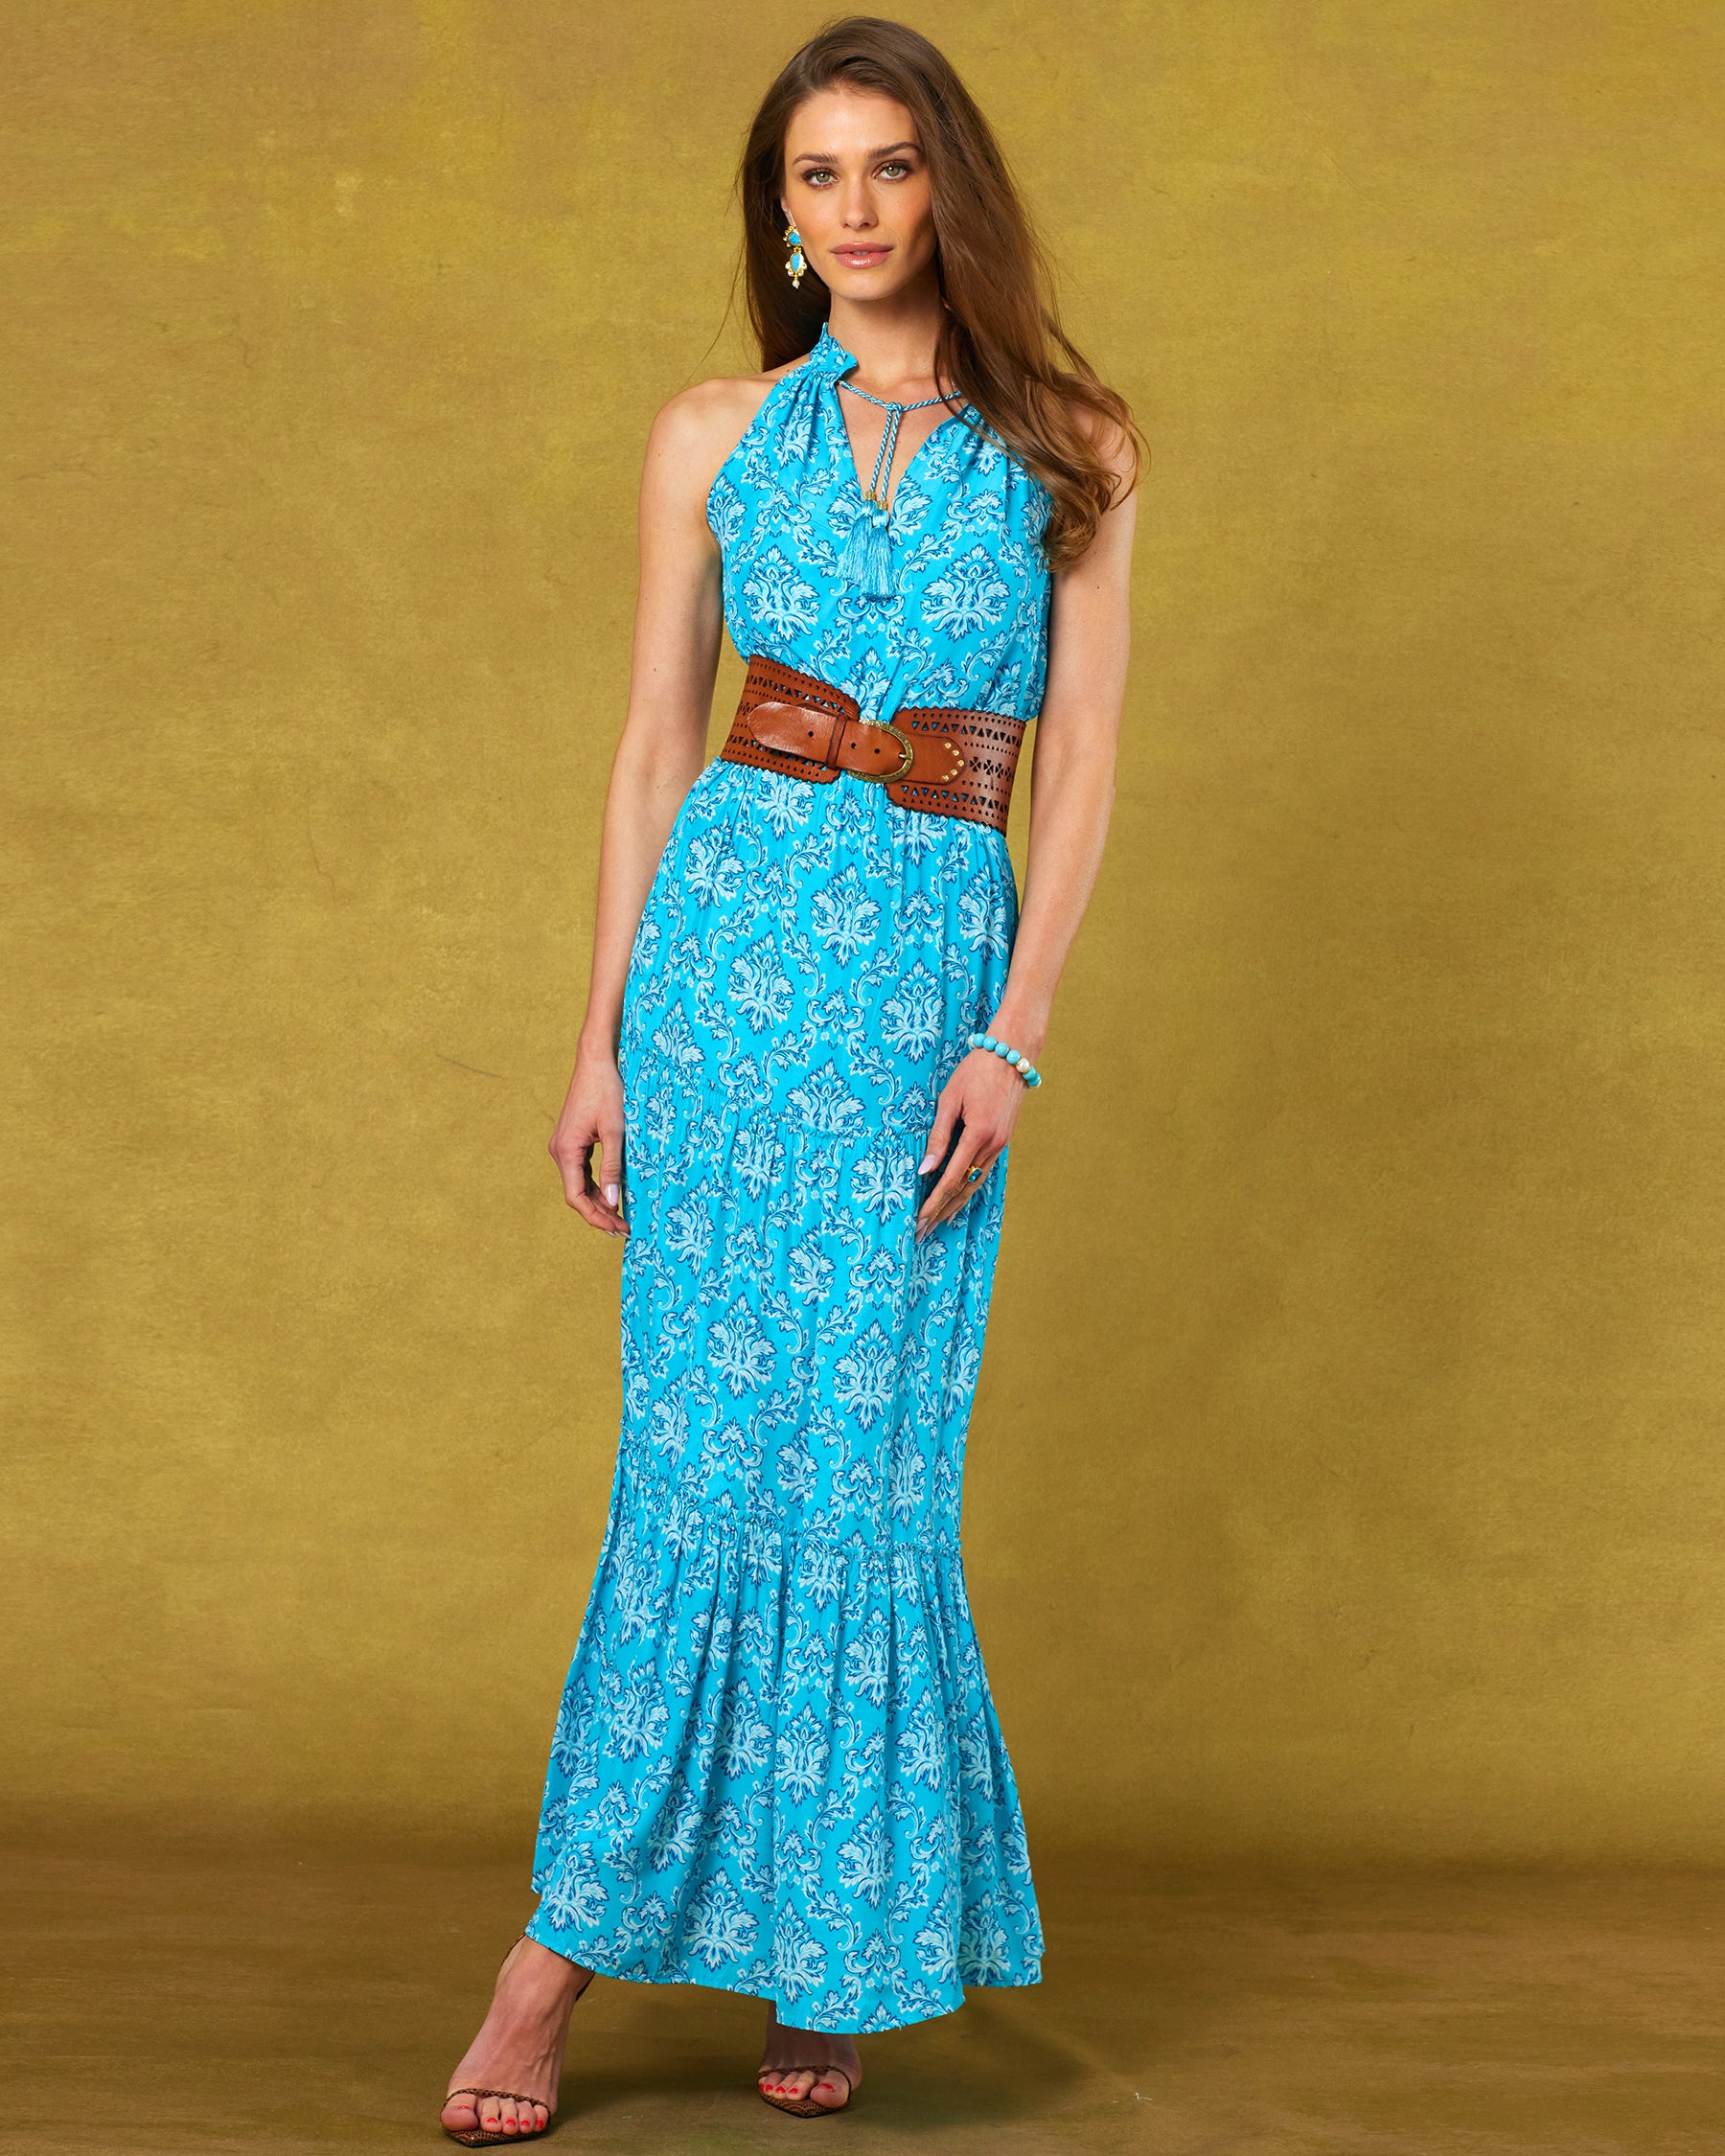 Campomaggi Malibu Wide Corset Pyramid Laser Cut Belt in Dark Brown worn with the Bailey Halterneck Maxi Dress in Turquoise Baroque Florals